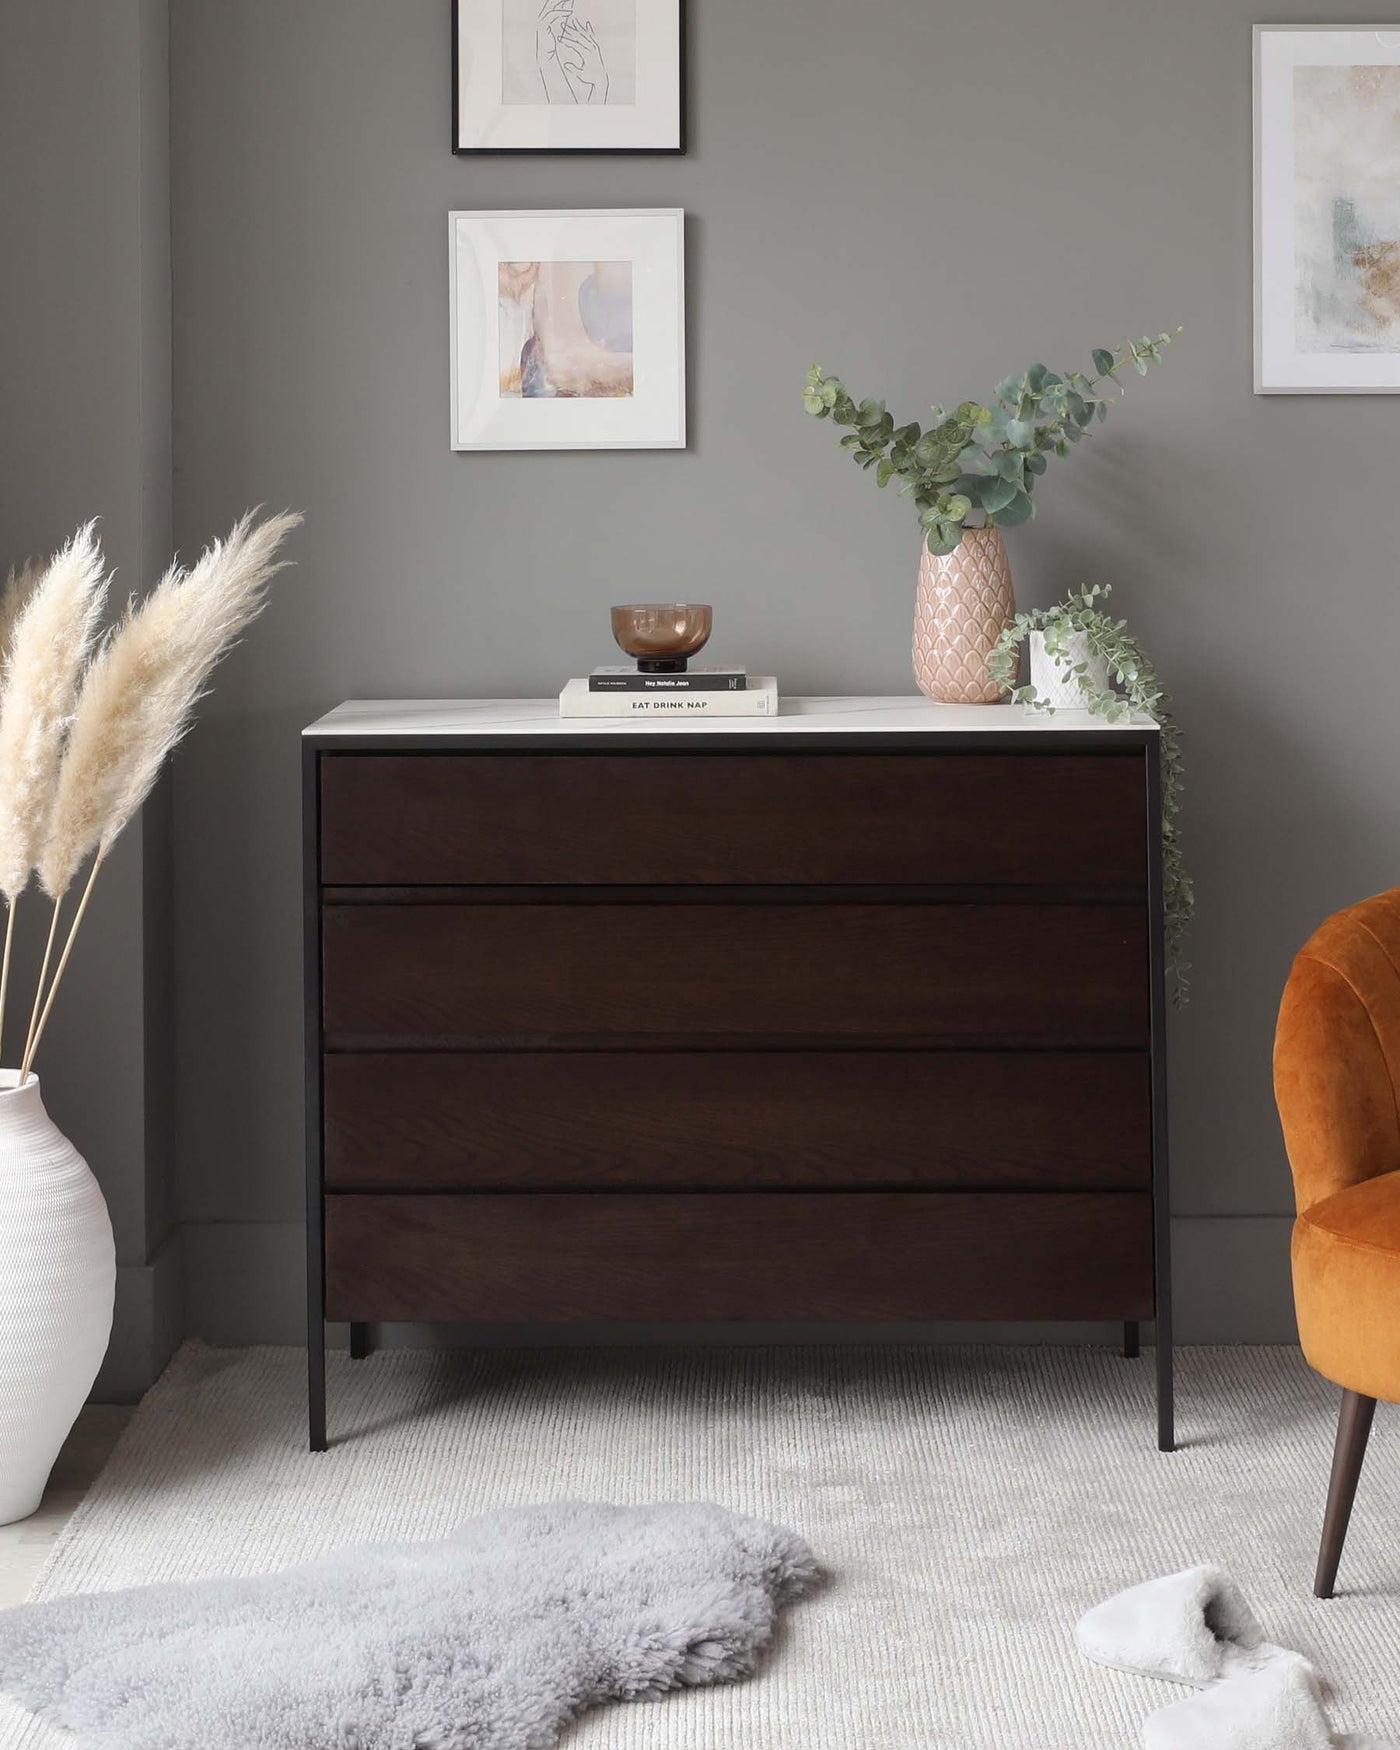 A modern dark-brown wooden dresser with three drawers, featuring sleek handles and angled legs.